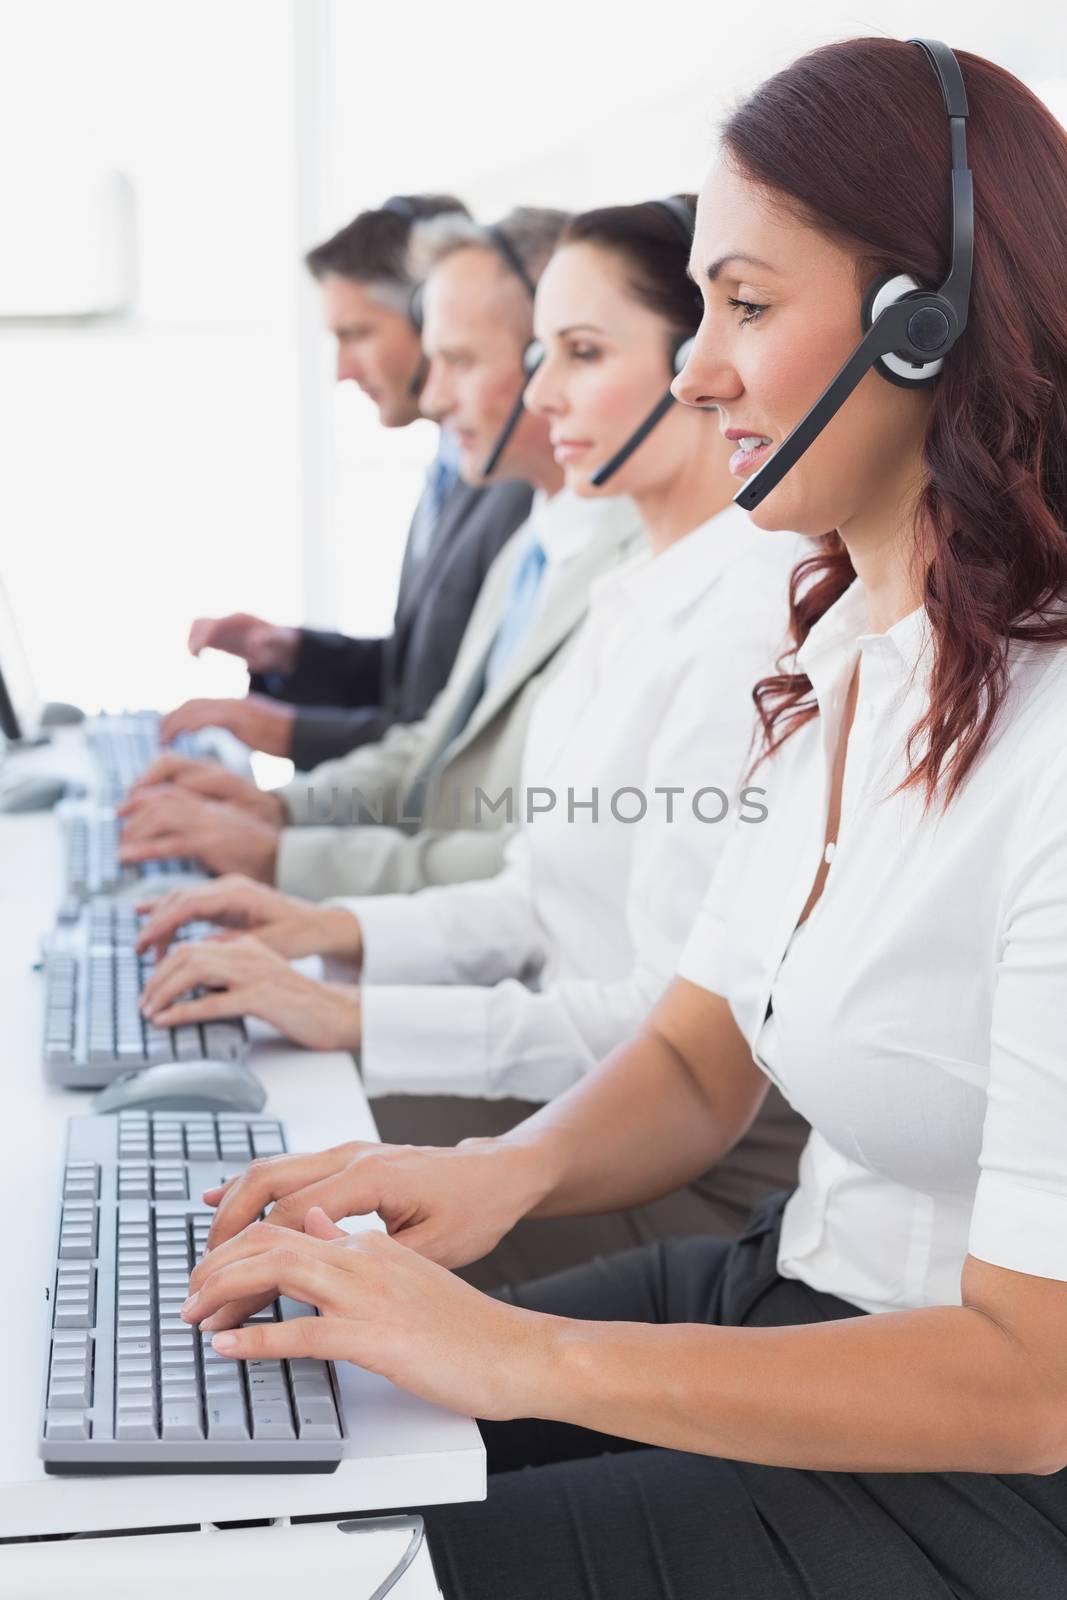 Employees typing on their computers using headsets